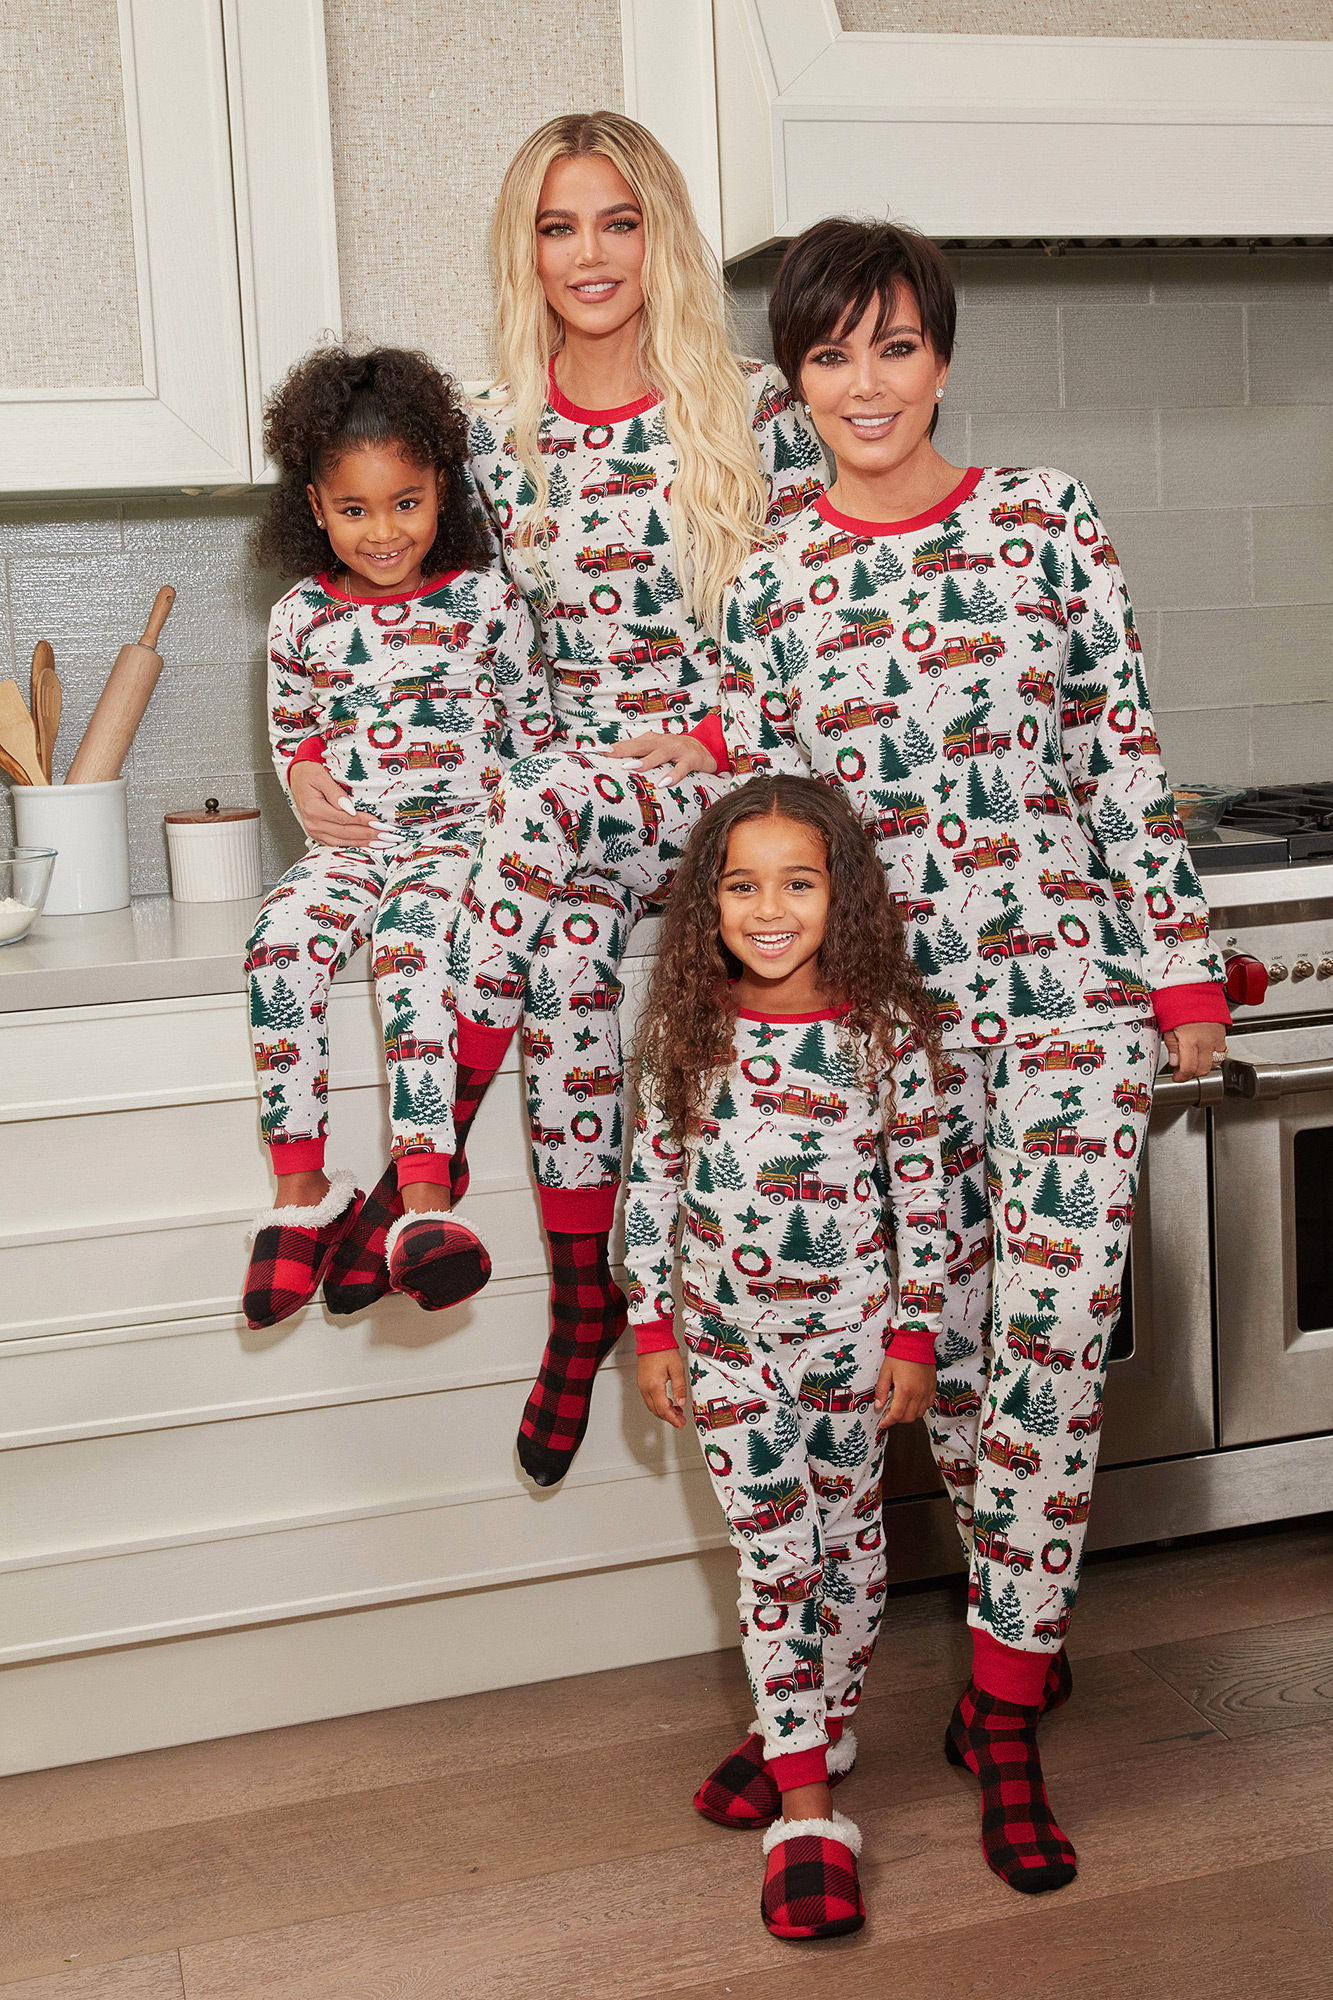 https://www.usmagazine.com/wp-content/uploads/2022/11/Sean-Lowe-Kylie-Jenner-and-More-Celeb-Parents-Wear-Matching-Pajamas-With-Their-Kids-Pics-325.jpg?quality=86&strip=all